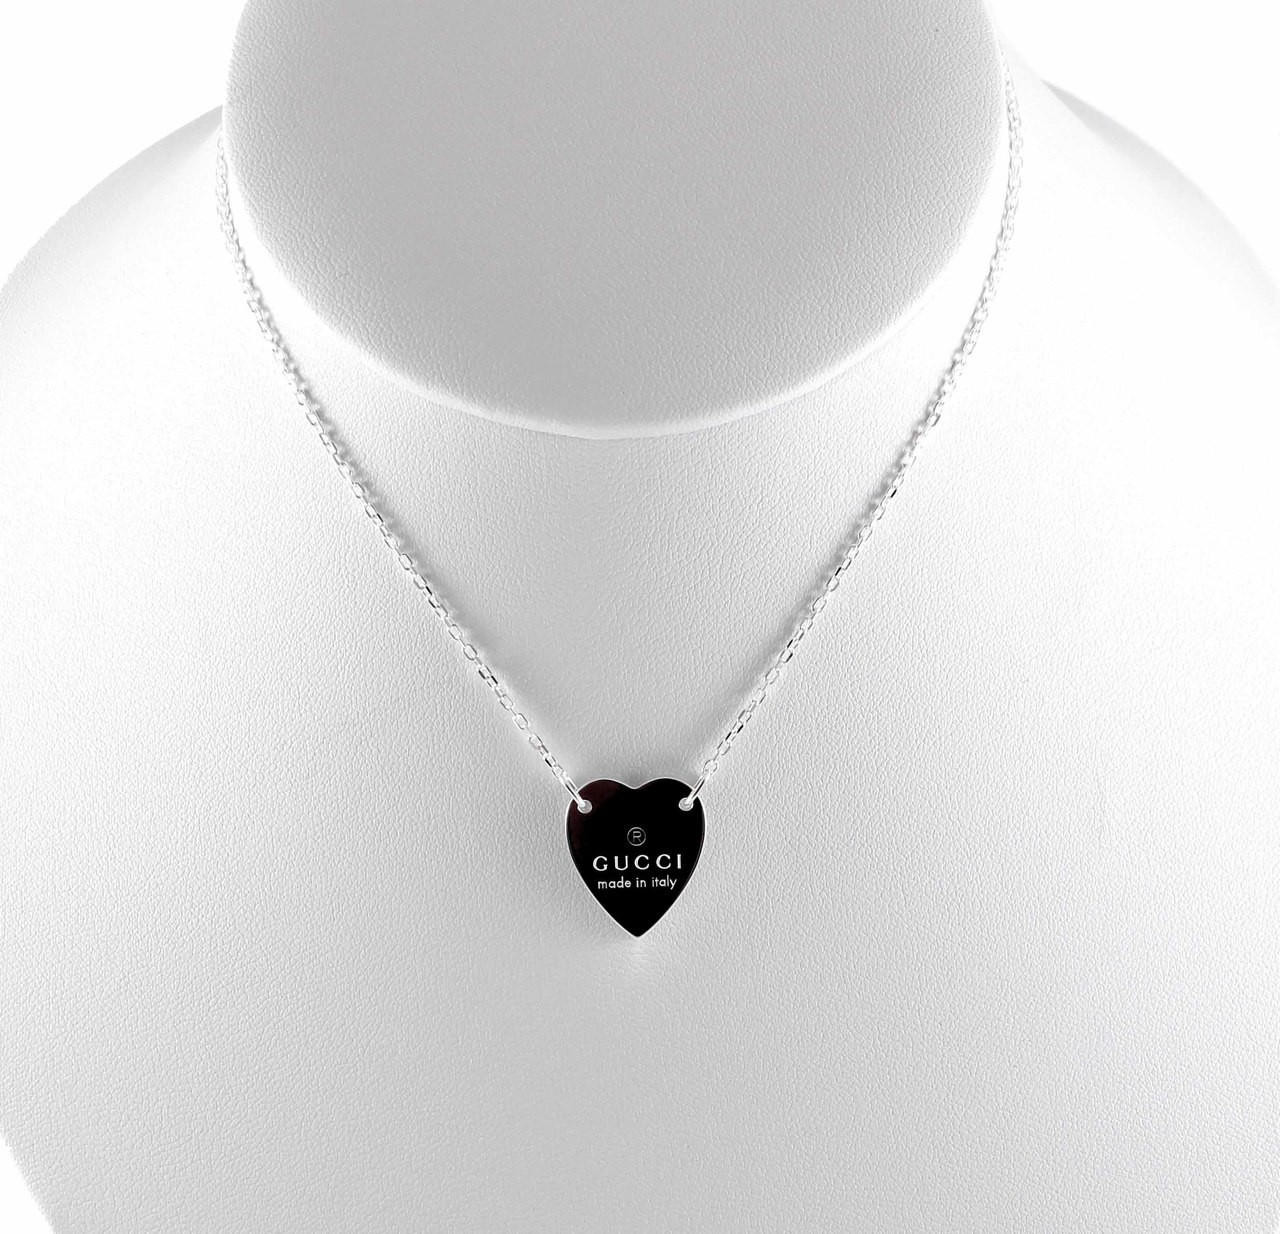 Louis Vuitton 💎 Silver necklace 💎 High quality jewelry